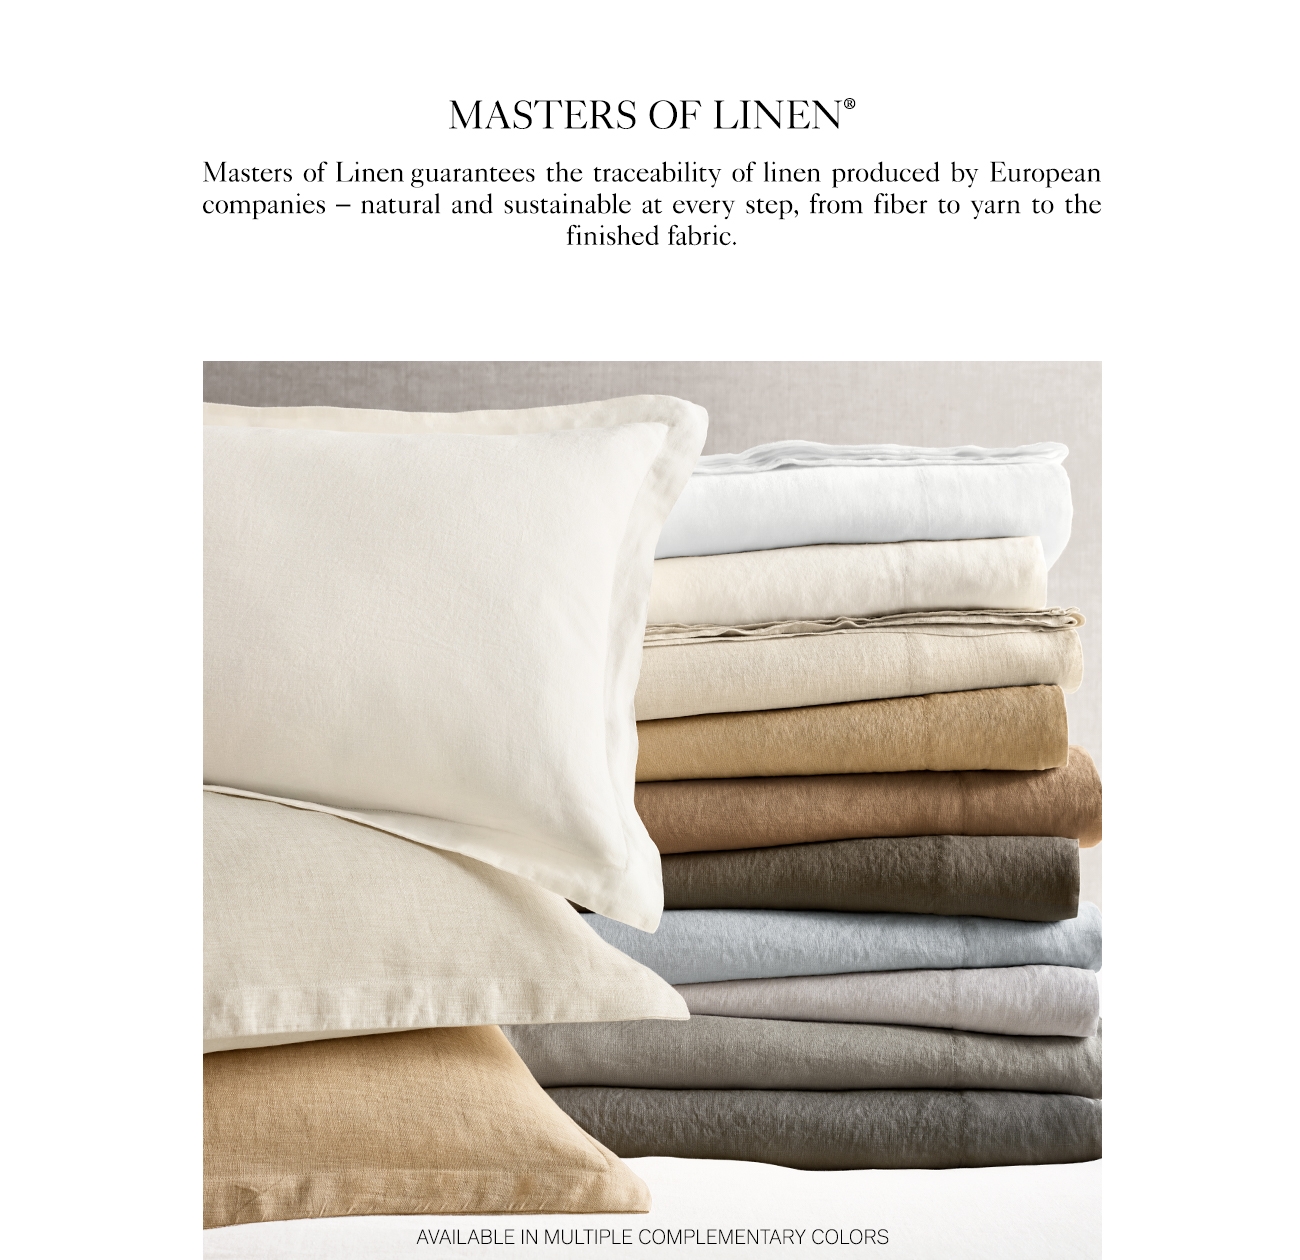 MASTERS OF LINEN Masters of Linen guarantees the traceability of linen produced by European companies natural and sustainable at every step, from fiber to yarn to the finished fabric. AVAILABLE IN MULTIPLE COMPLEMENTARY COLORS 